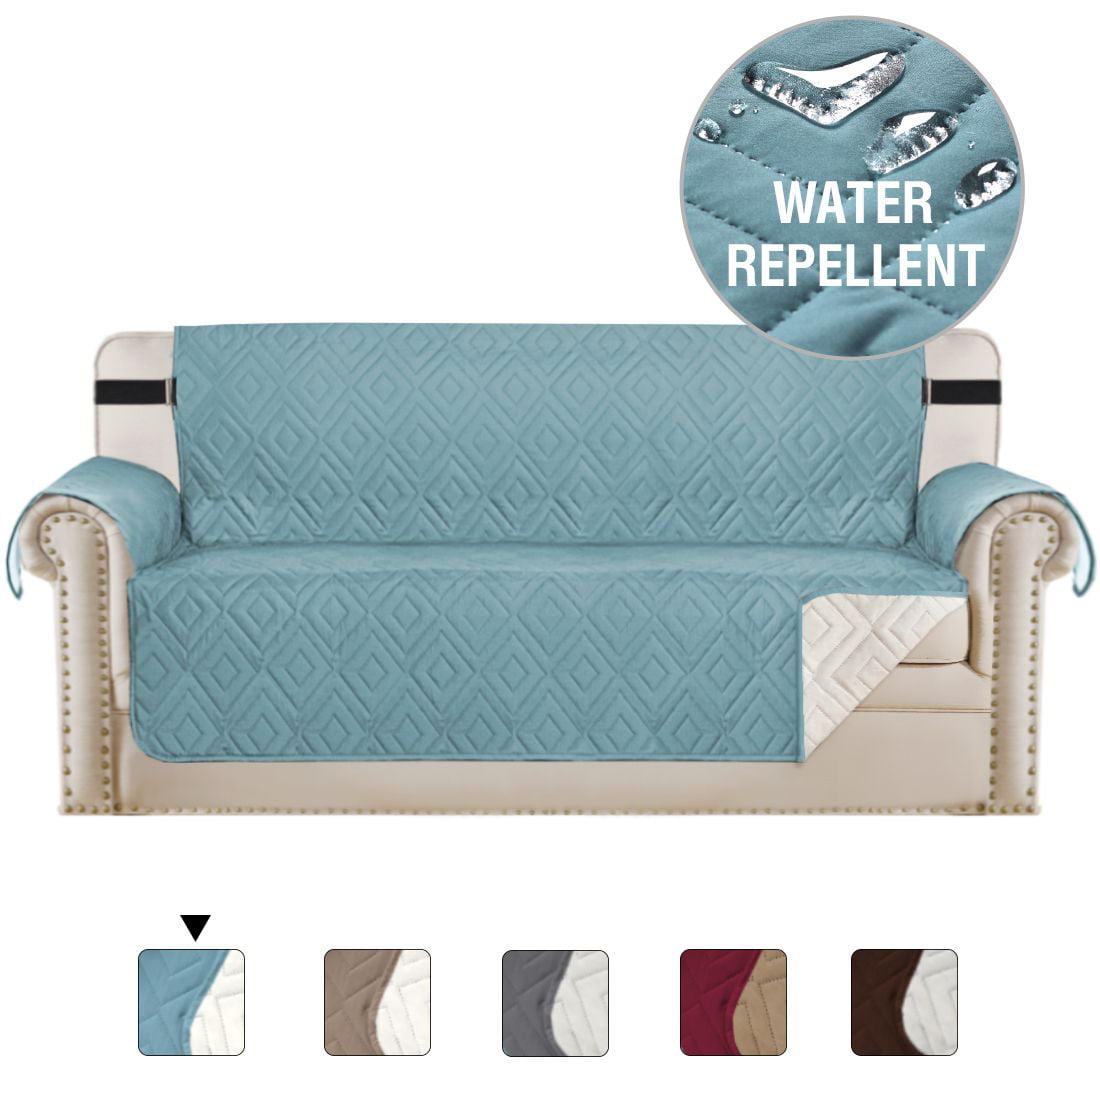 Details about   Quilted Slipcover with Lint Roller Waterproof Nonslip Reversible Sofa Cover Pet 